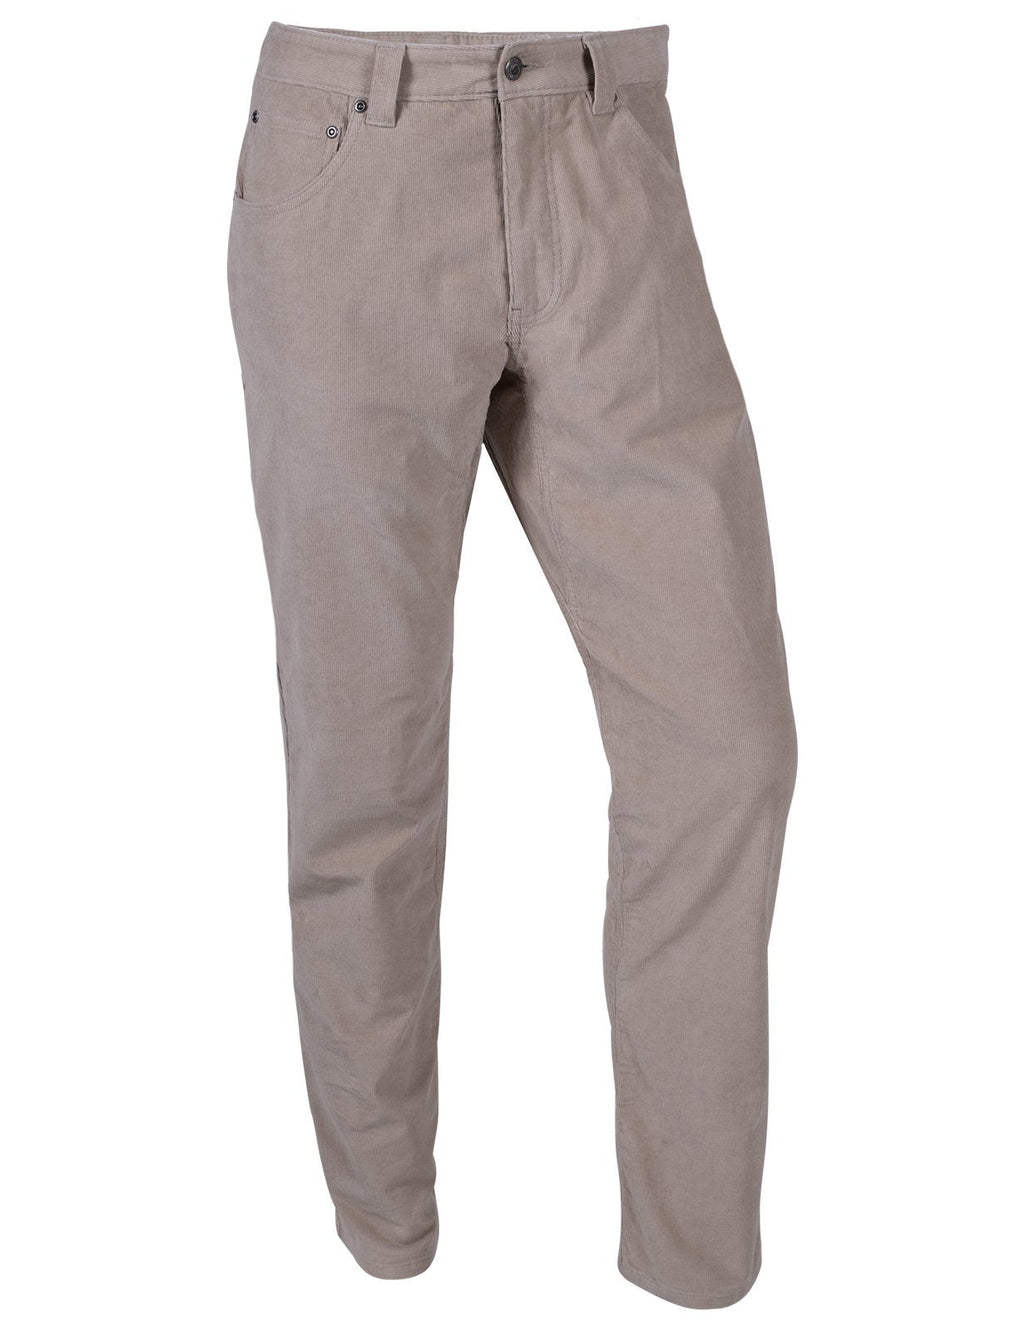 Front view of the Men's Crest Cord Pant.